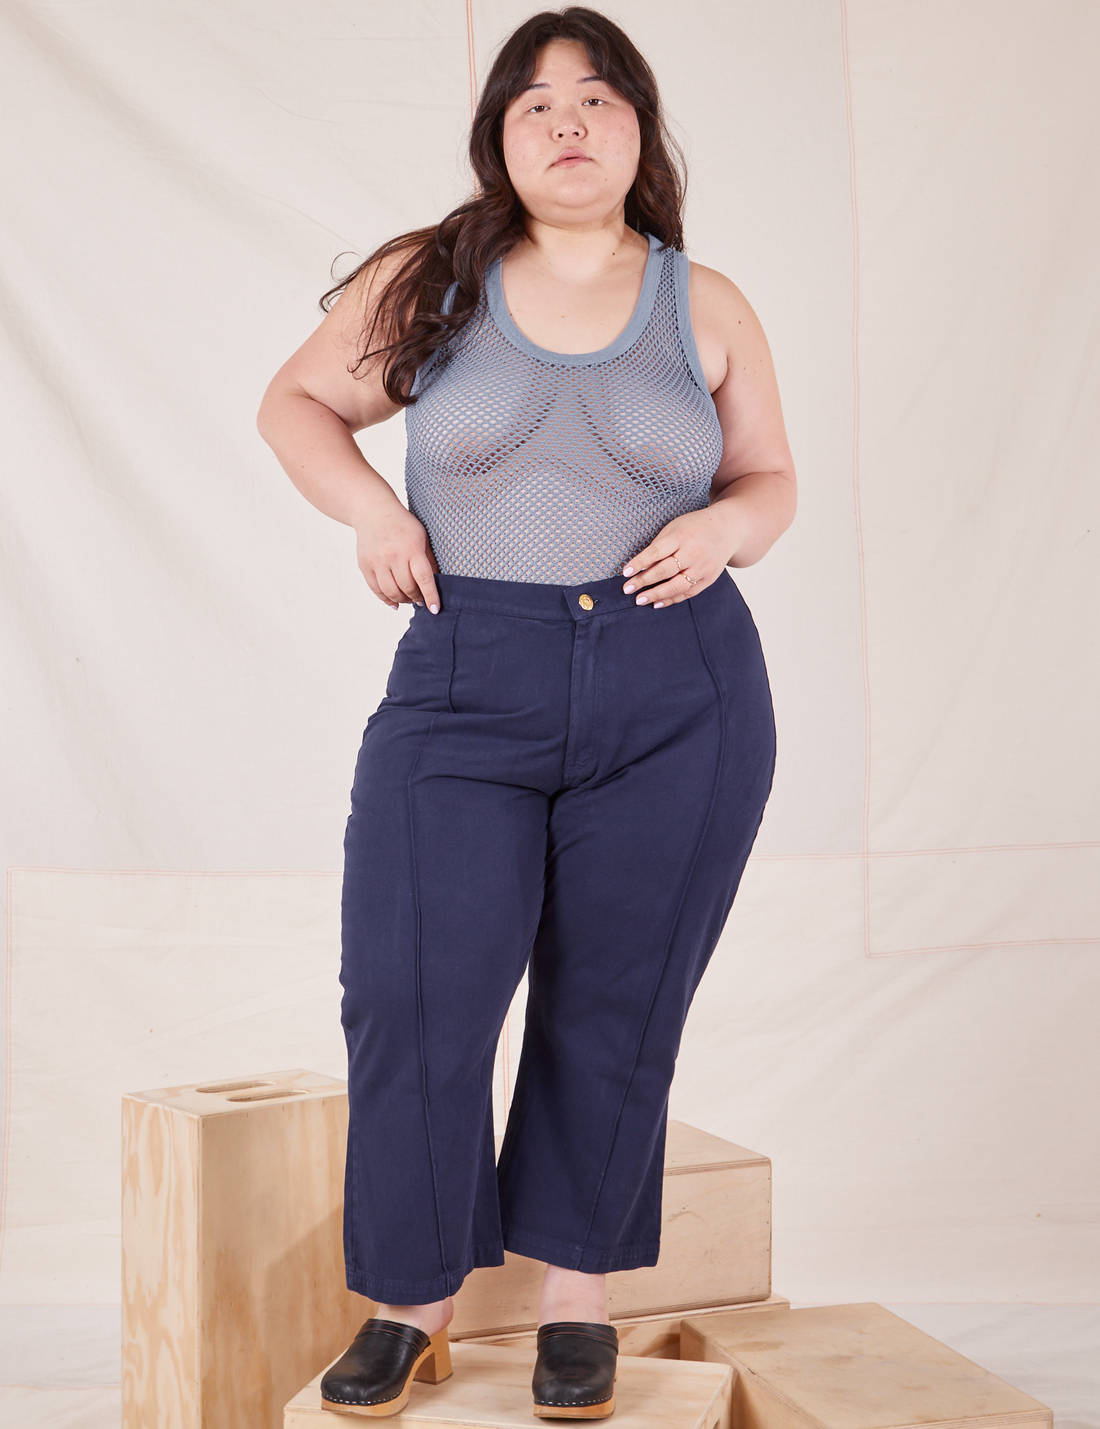 Ashley is wearing Mesh Tank Top in Periwinkle and navy Western Pants